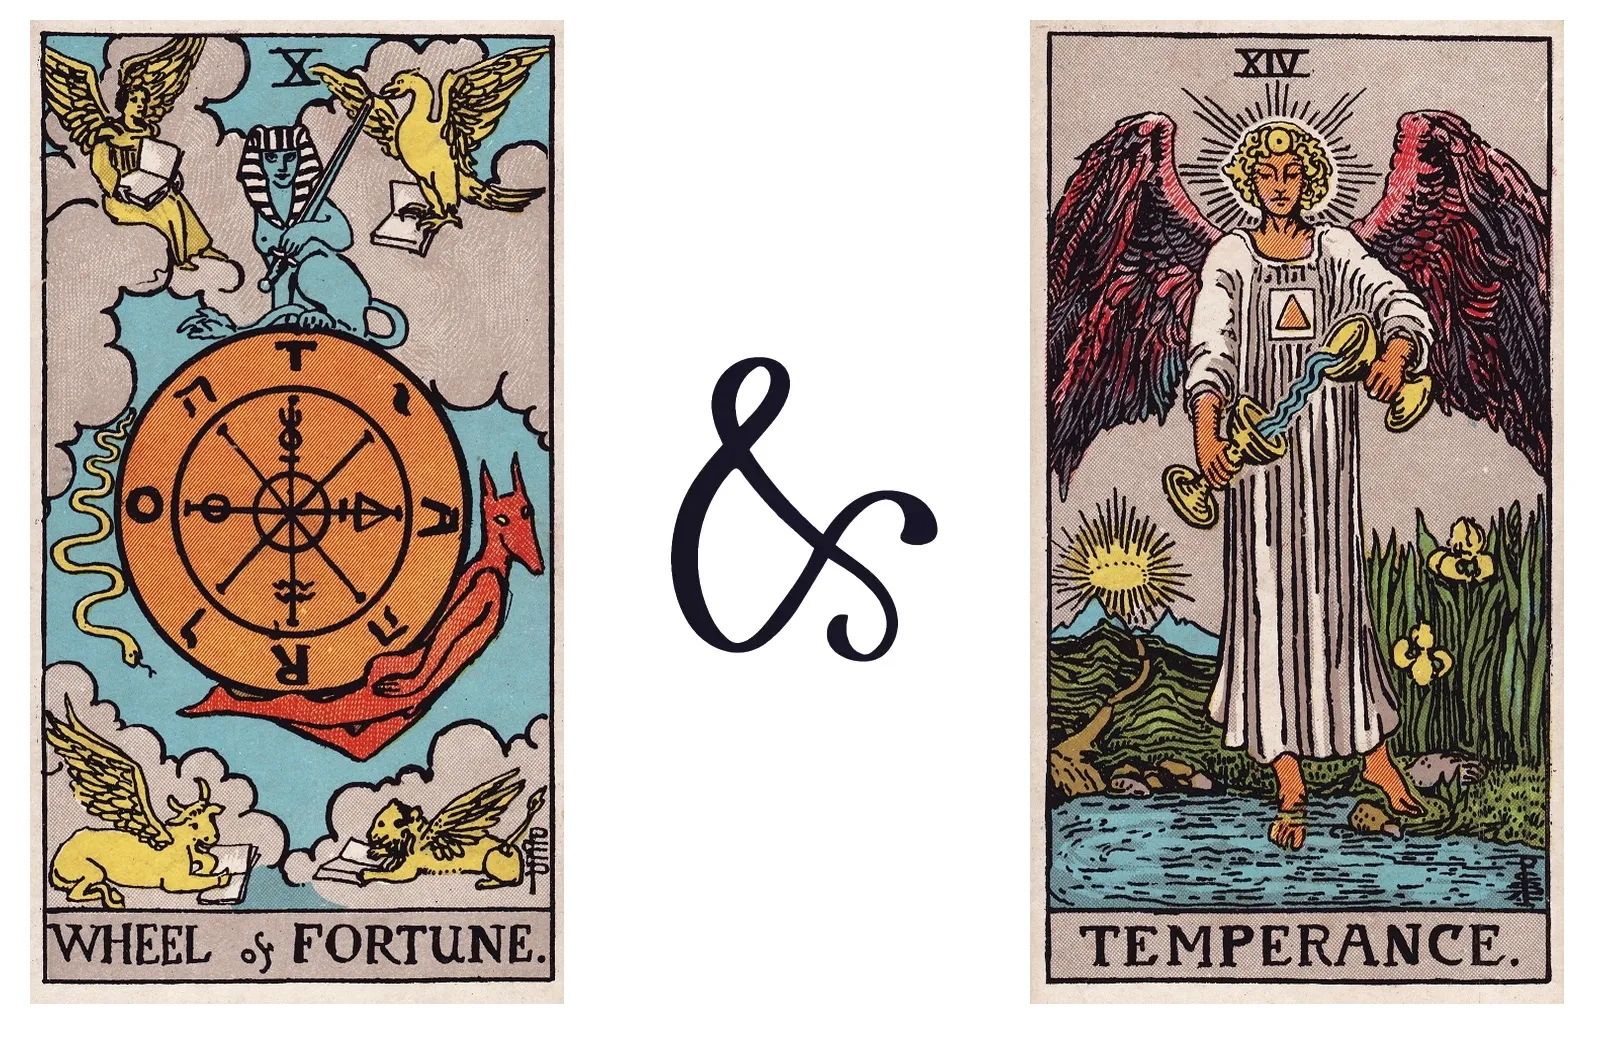 Wheel of Fortune and Temperance